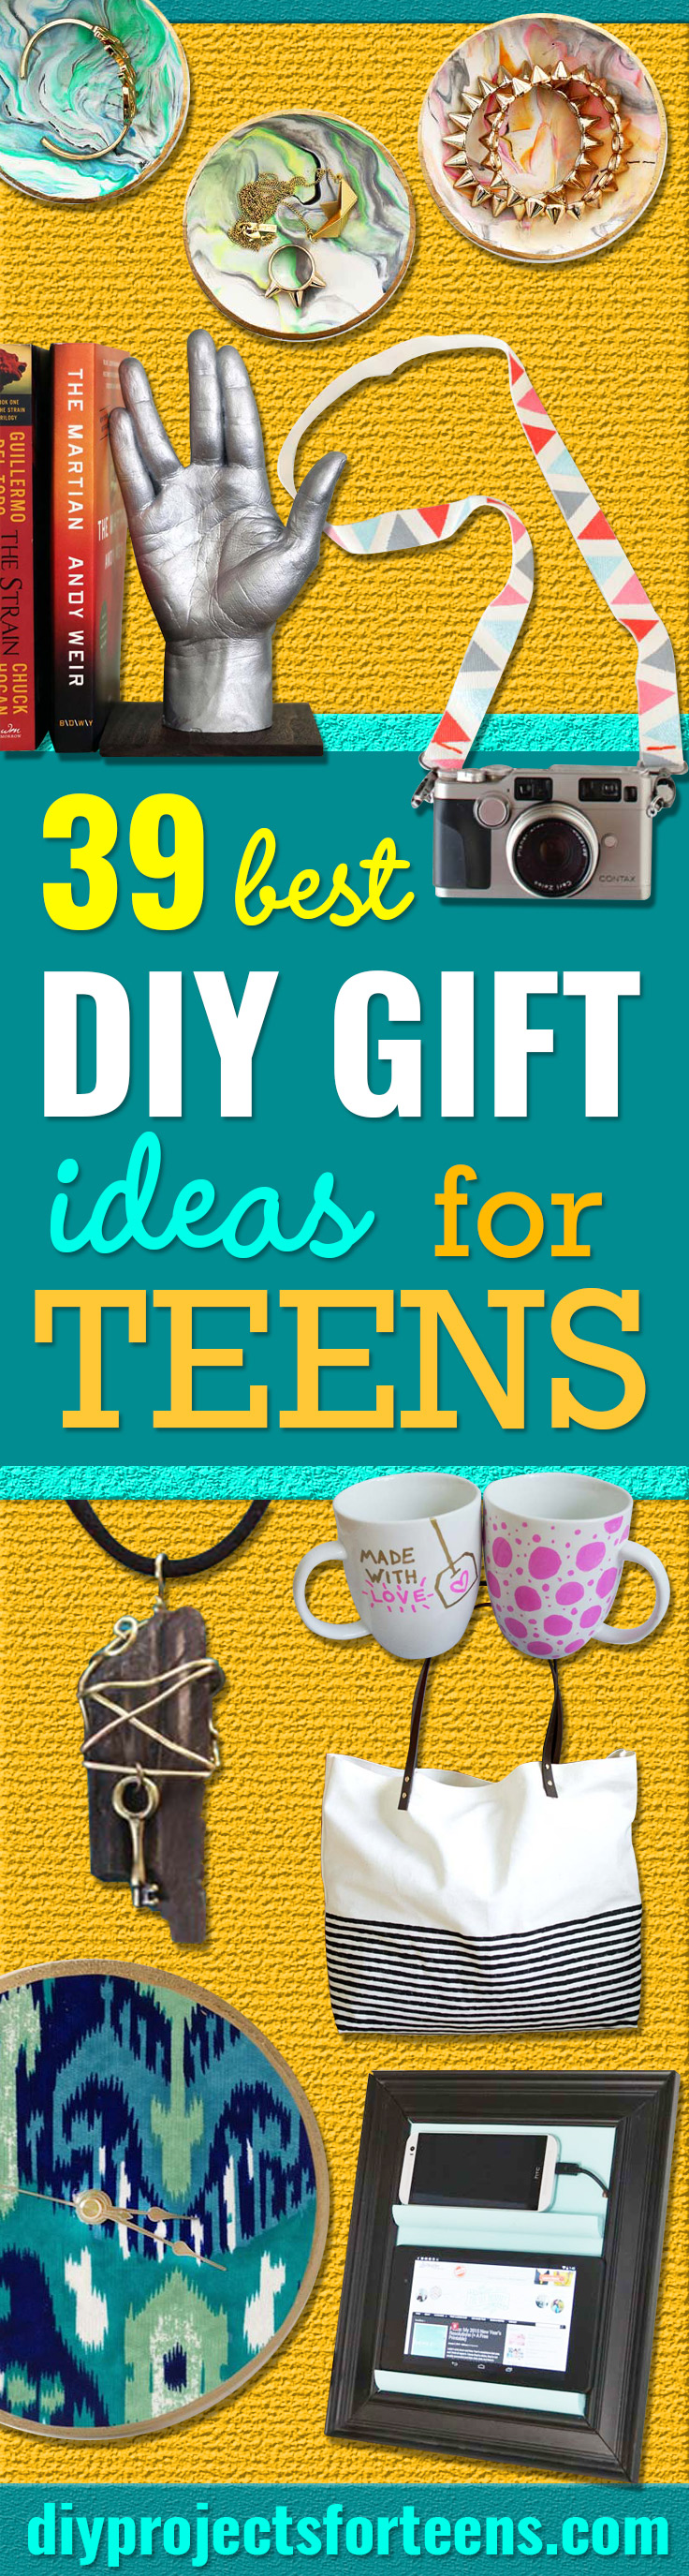 DIY Gifts for Teens - Cool Ideas for Girls and Boys, Friends and Gift Ideas for Teenagers. Creative Room Decor, Fun Wall Art and Awesome Crafts You Can Make for Presents #teengifts #teencrafts